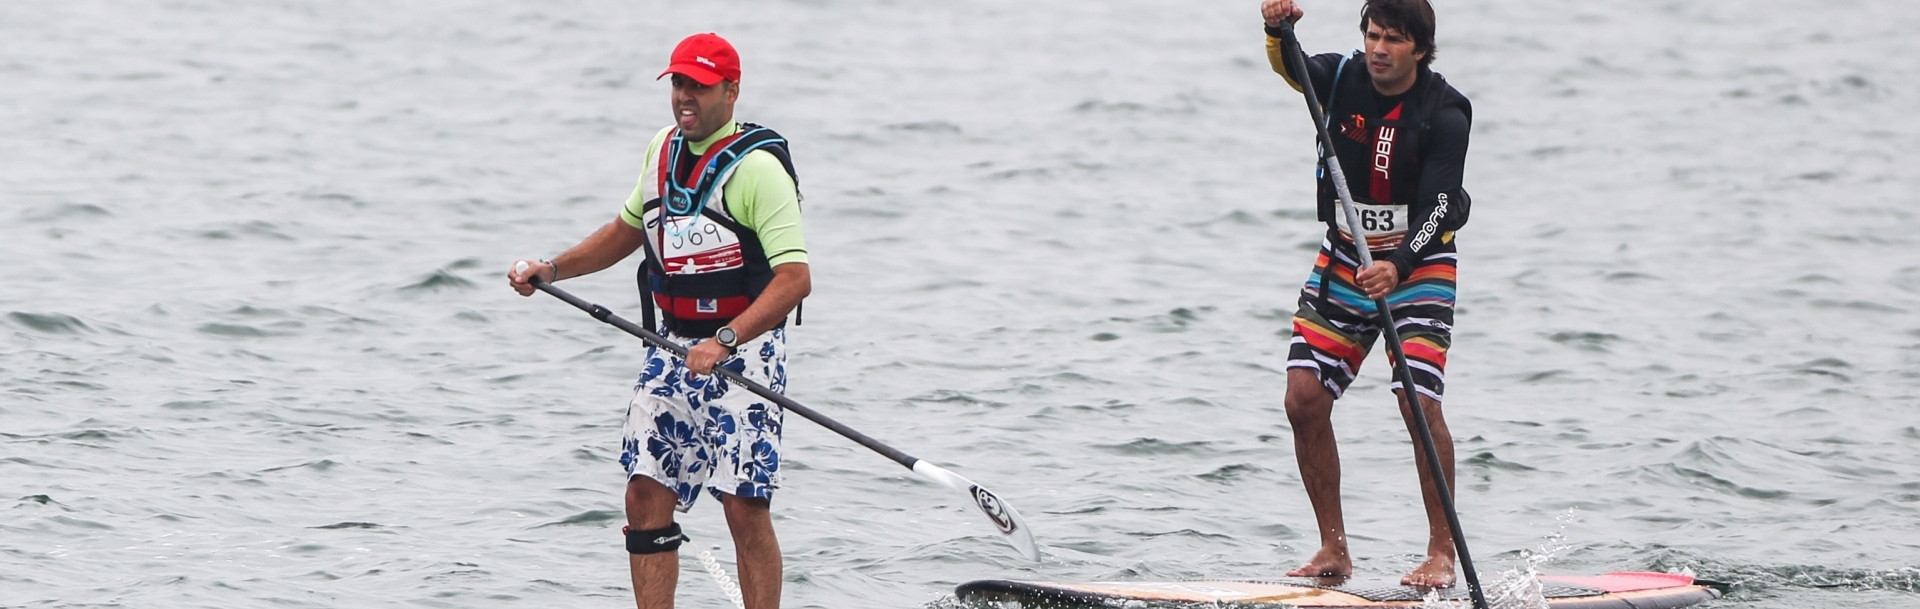 ICF deny reports that Stand Up Paddling World Championships facing legal challenge